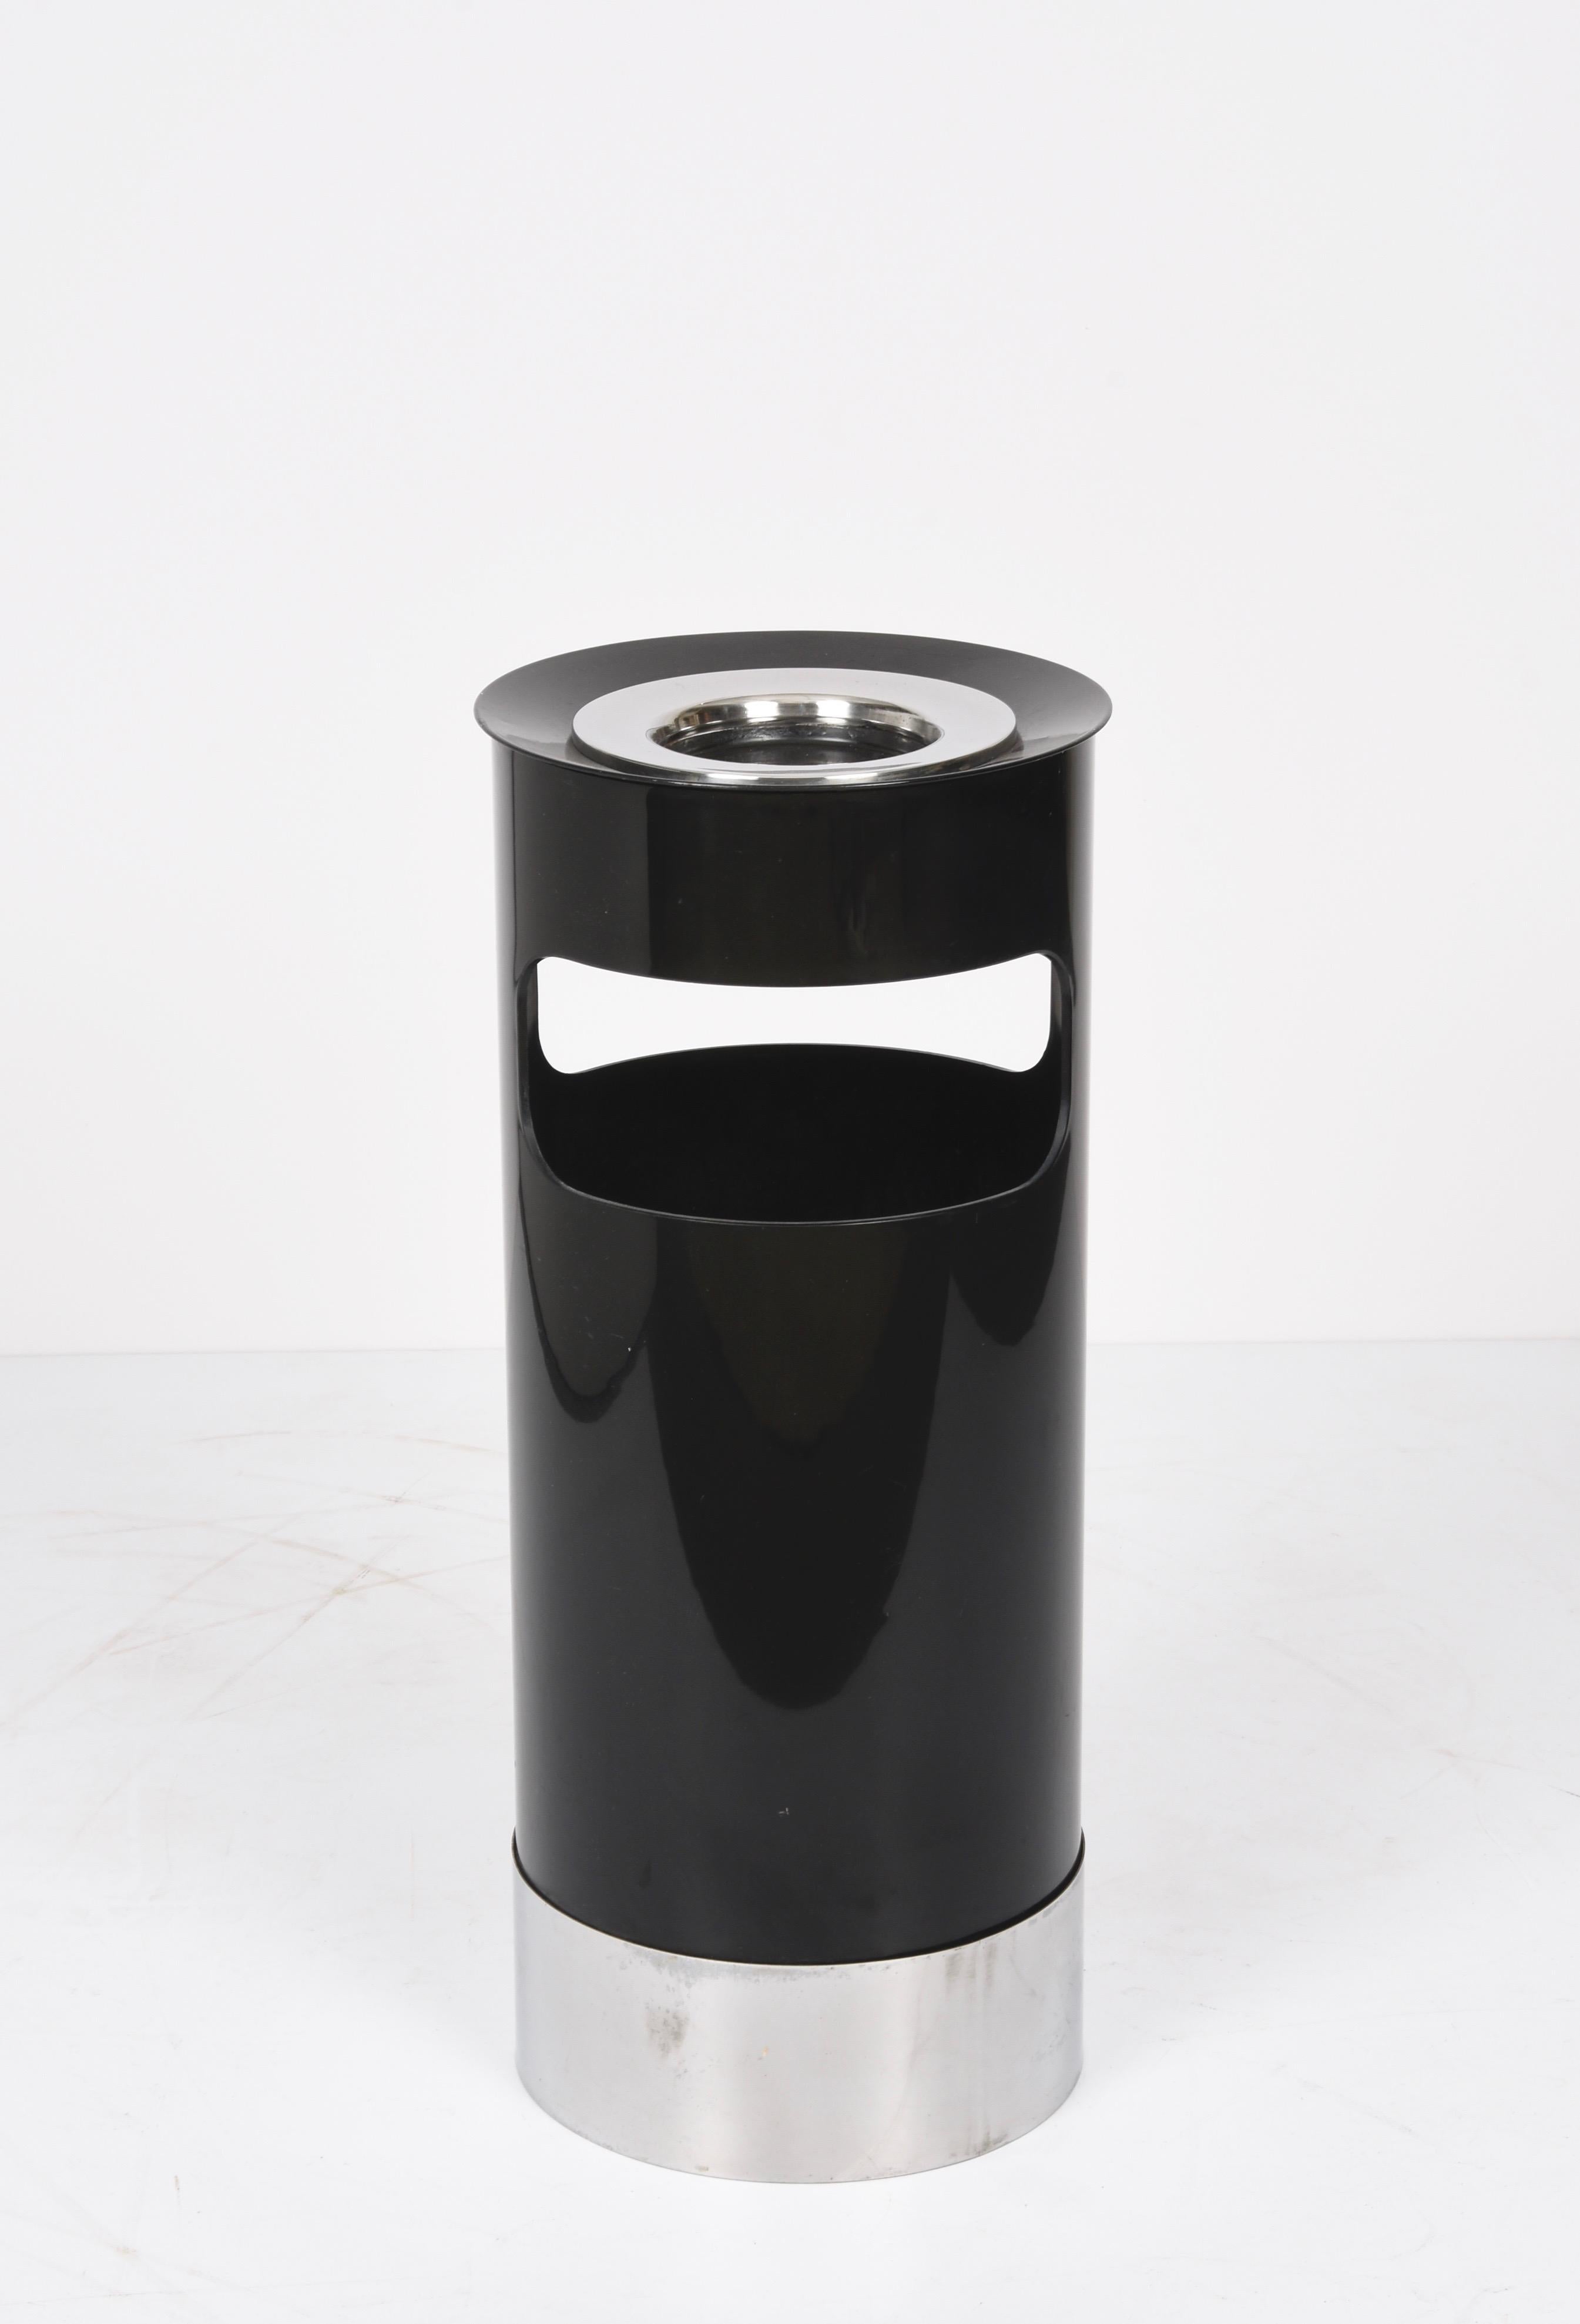 Gino Colombini Midcentury Black Umbrella Stands or Ashtray for Kartell, 1970 For Sale 9